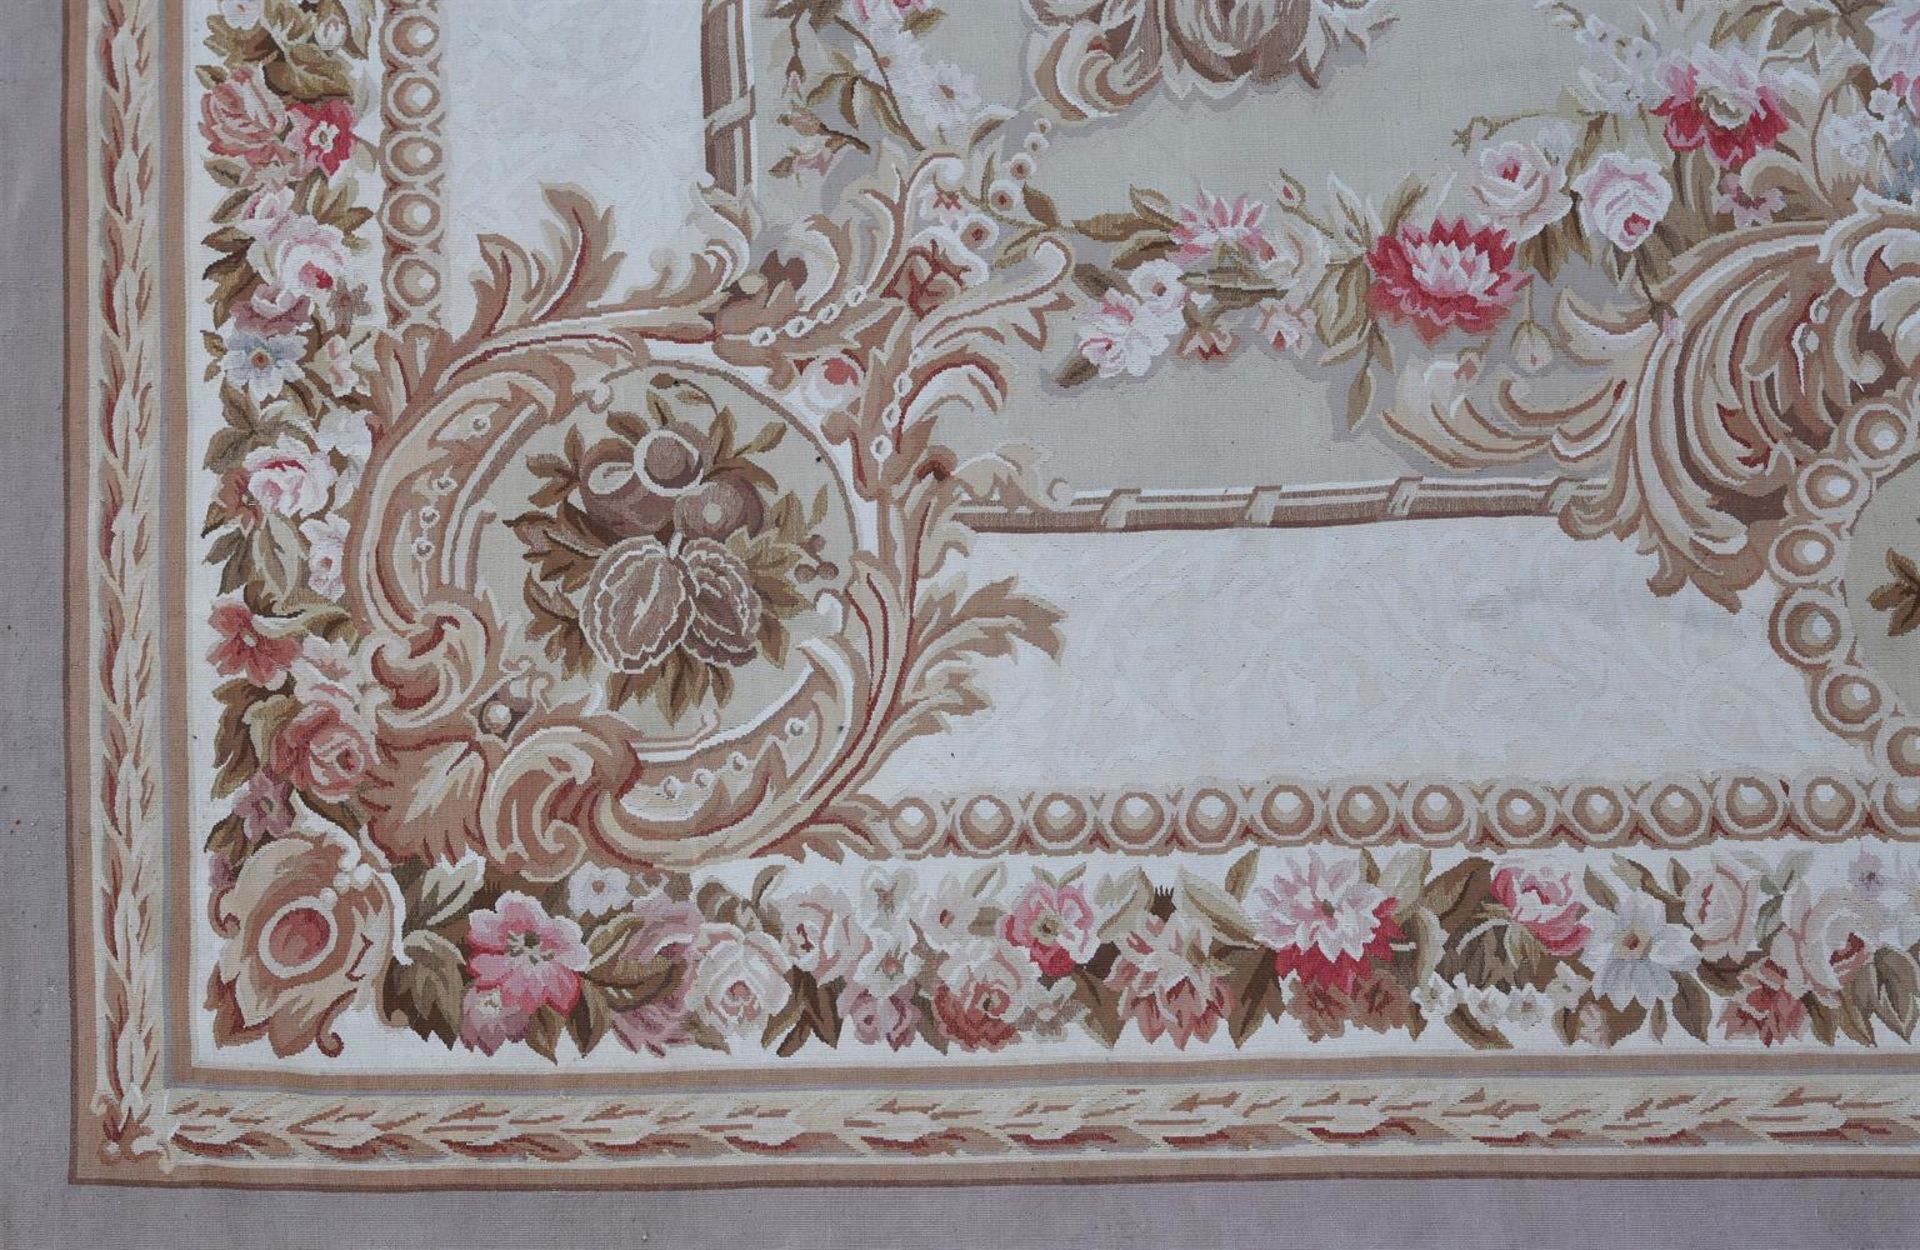 A FRENCH WOVEN CARPET IN AUBUSSON STYLE - Image 3 of 3